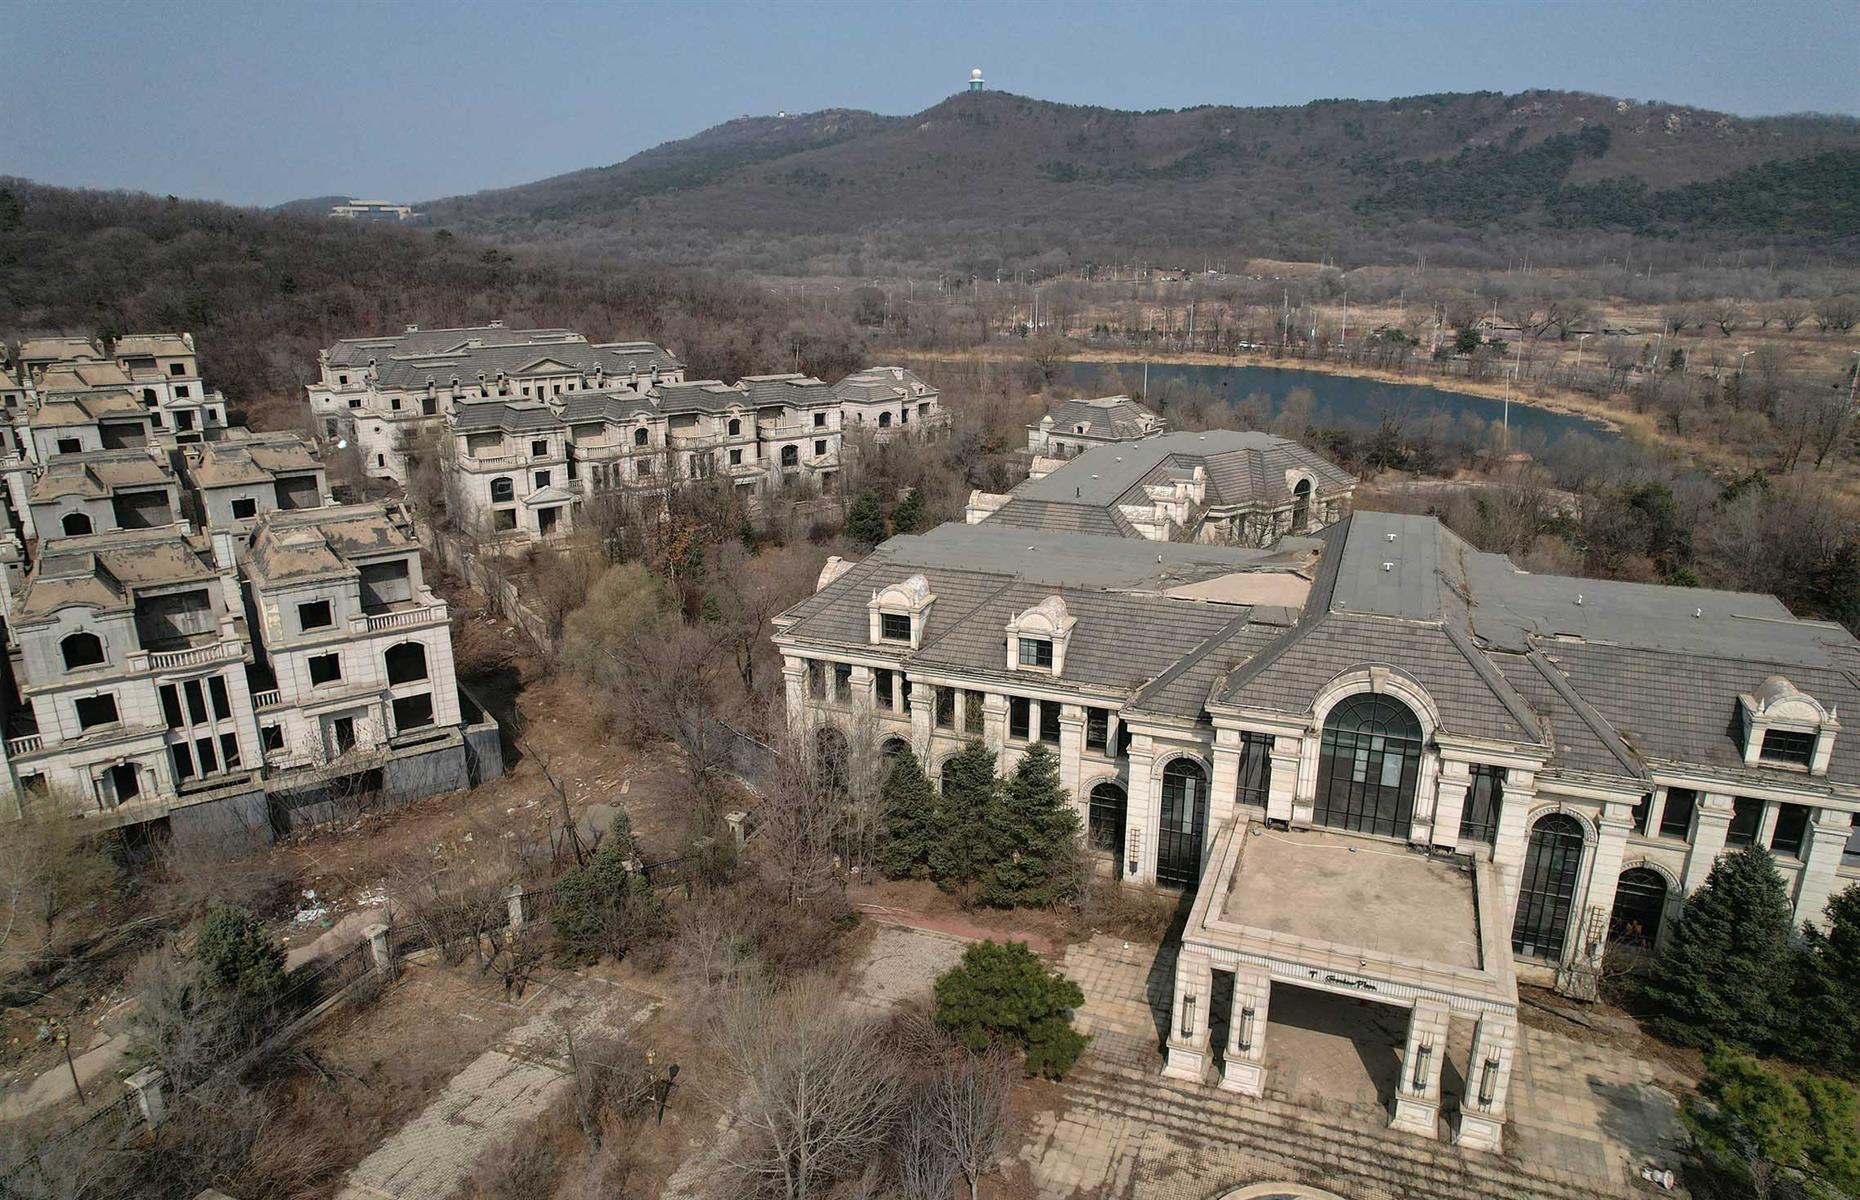 <p>In 2010, Chinese property giant Greenland Group began building State Guest Mansions, an upmarket neighborhood of 260 lavish homes complete with luxury amenities, designed for China's millionaires. </p>  <p>But just two years later, the elaborate plans were shelved and these European-style châteaux were left to rot. “These [homes] would have sold for millions – but the rich haven’t even bought one of them,” a local farmer told <a href="https://hongkongfp.com/2023/07/23/in-northeastern-china-farmers-reclaim-ghost-town-of-mansions-abandoned-by-housing-developer/"><em>AFP</em></a>. “They weren’t built for ordinary people.”</p>